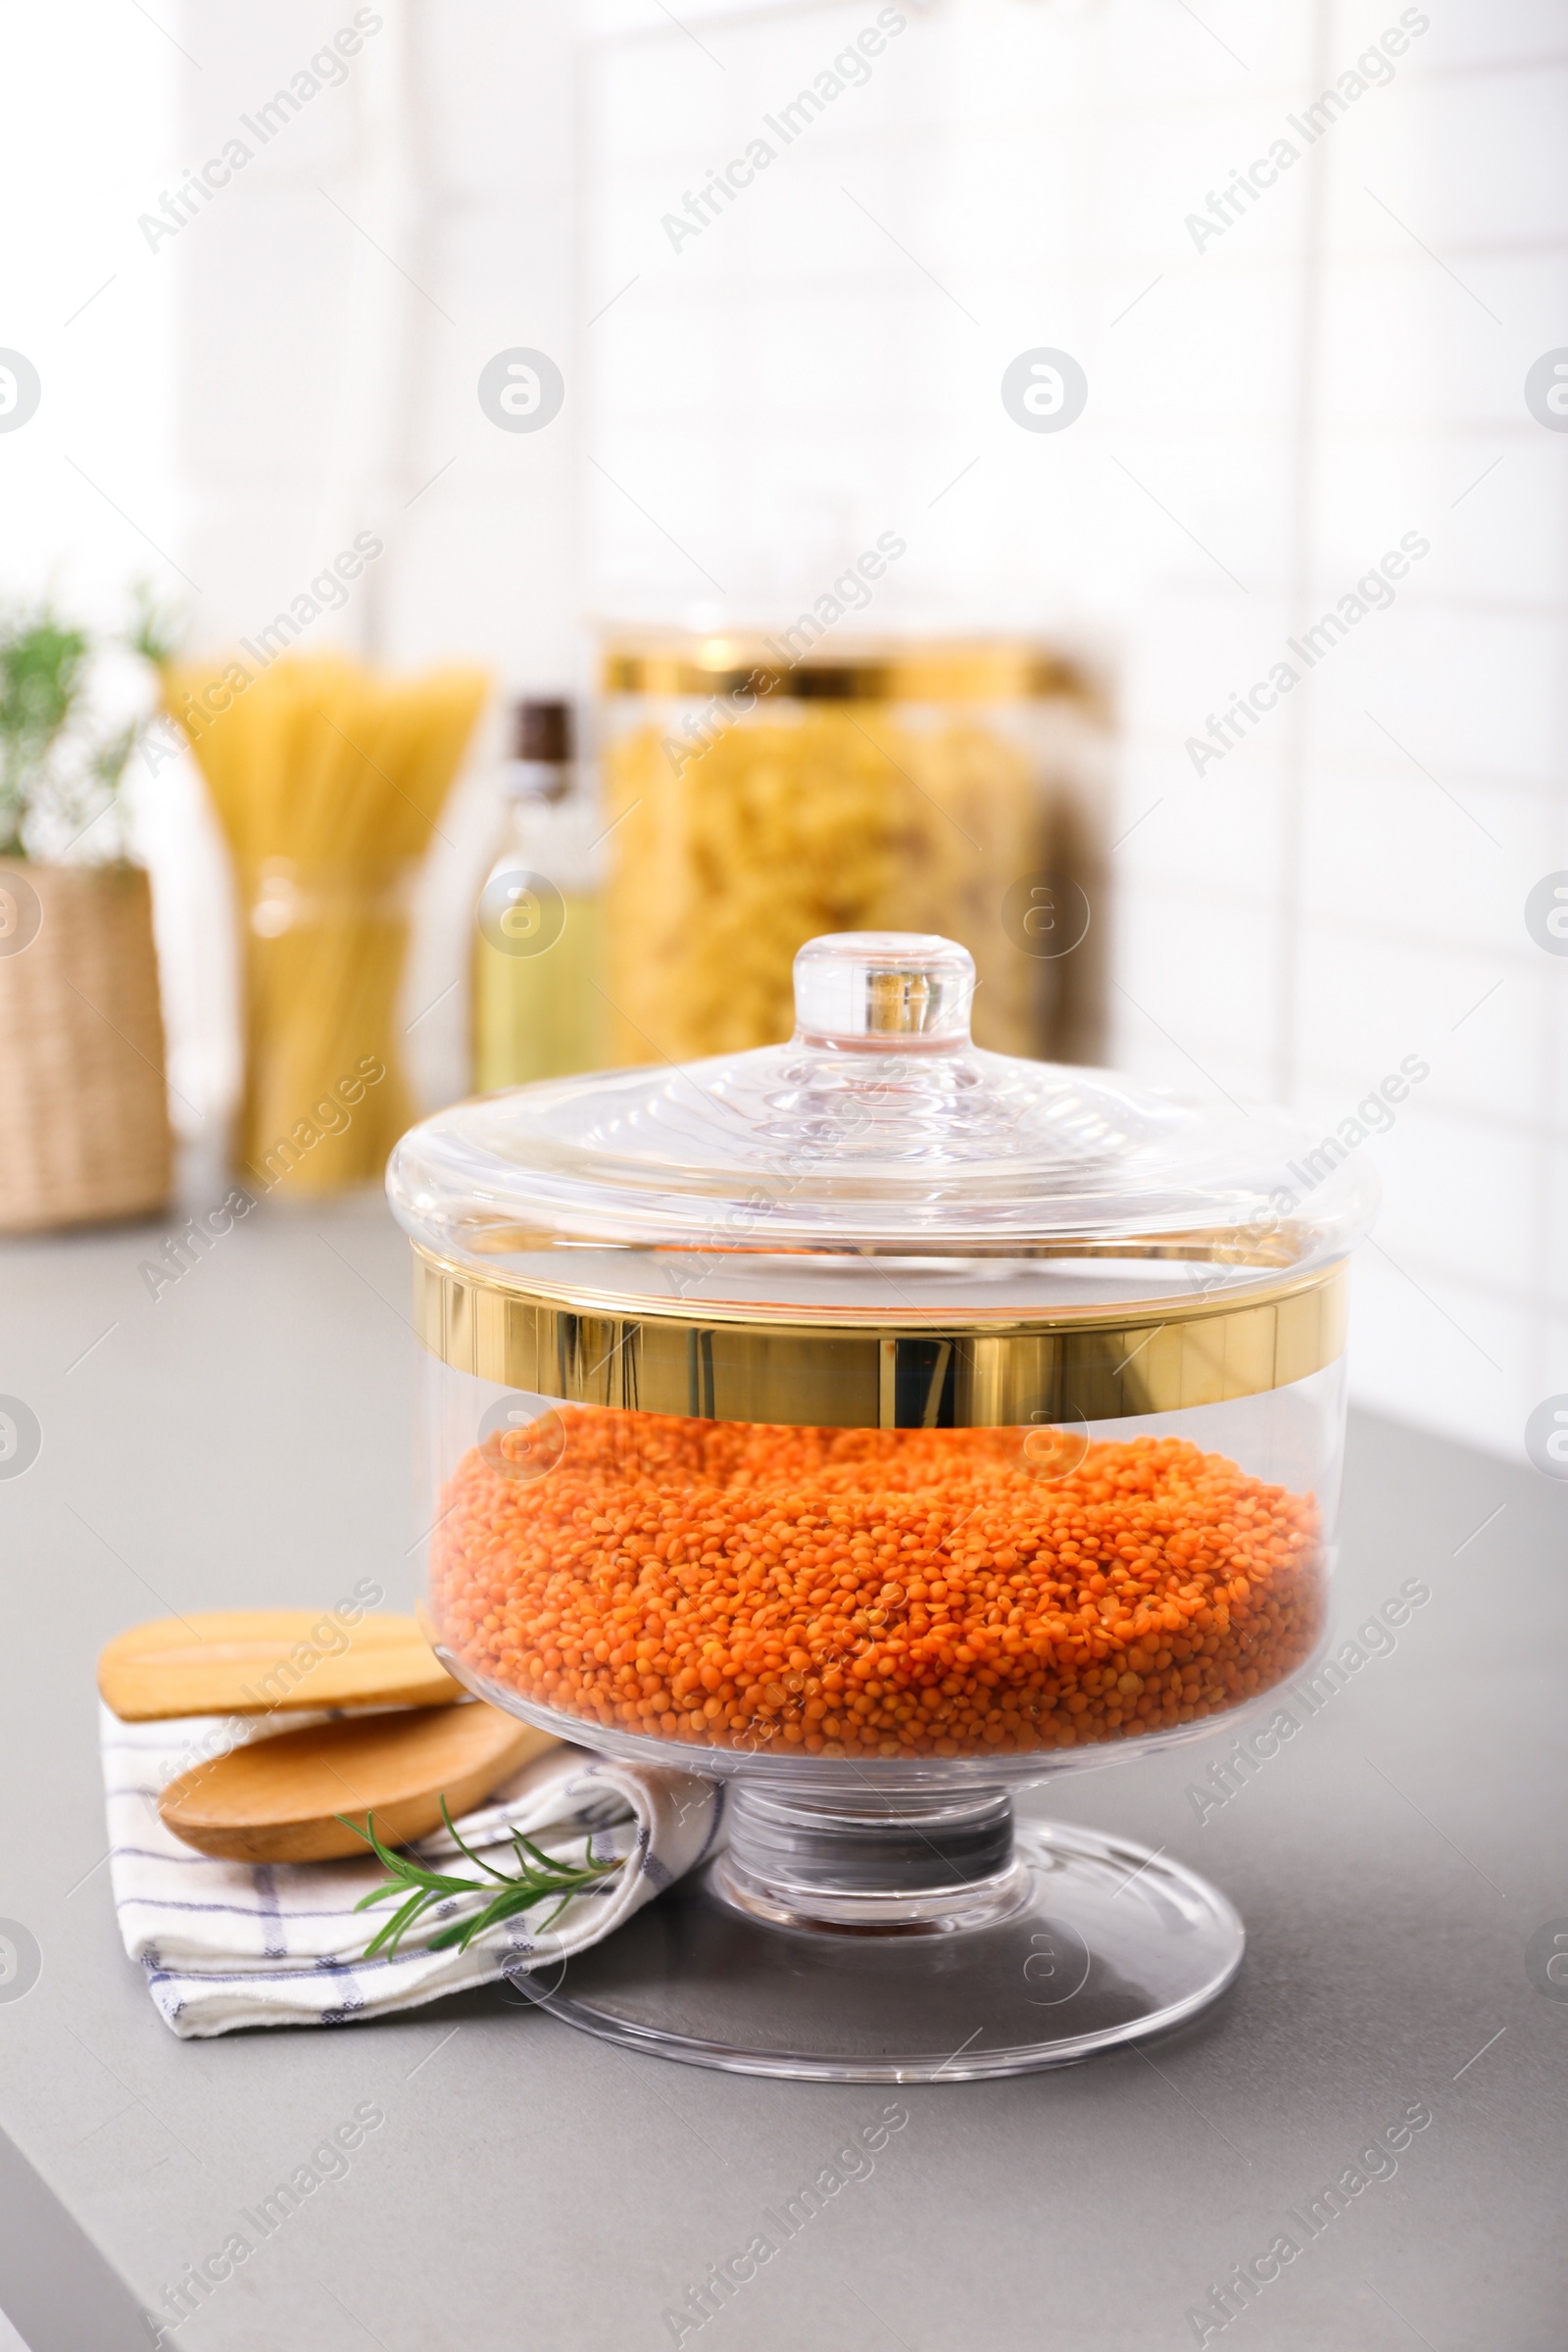 Photo of Red lentil in modern kitchen glass container on table